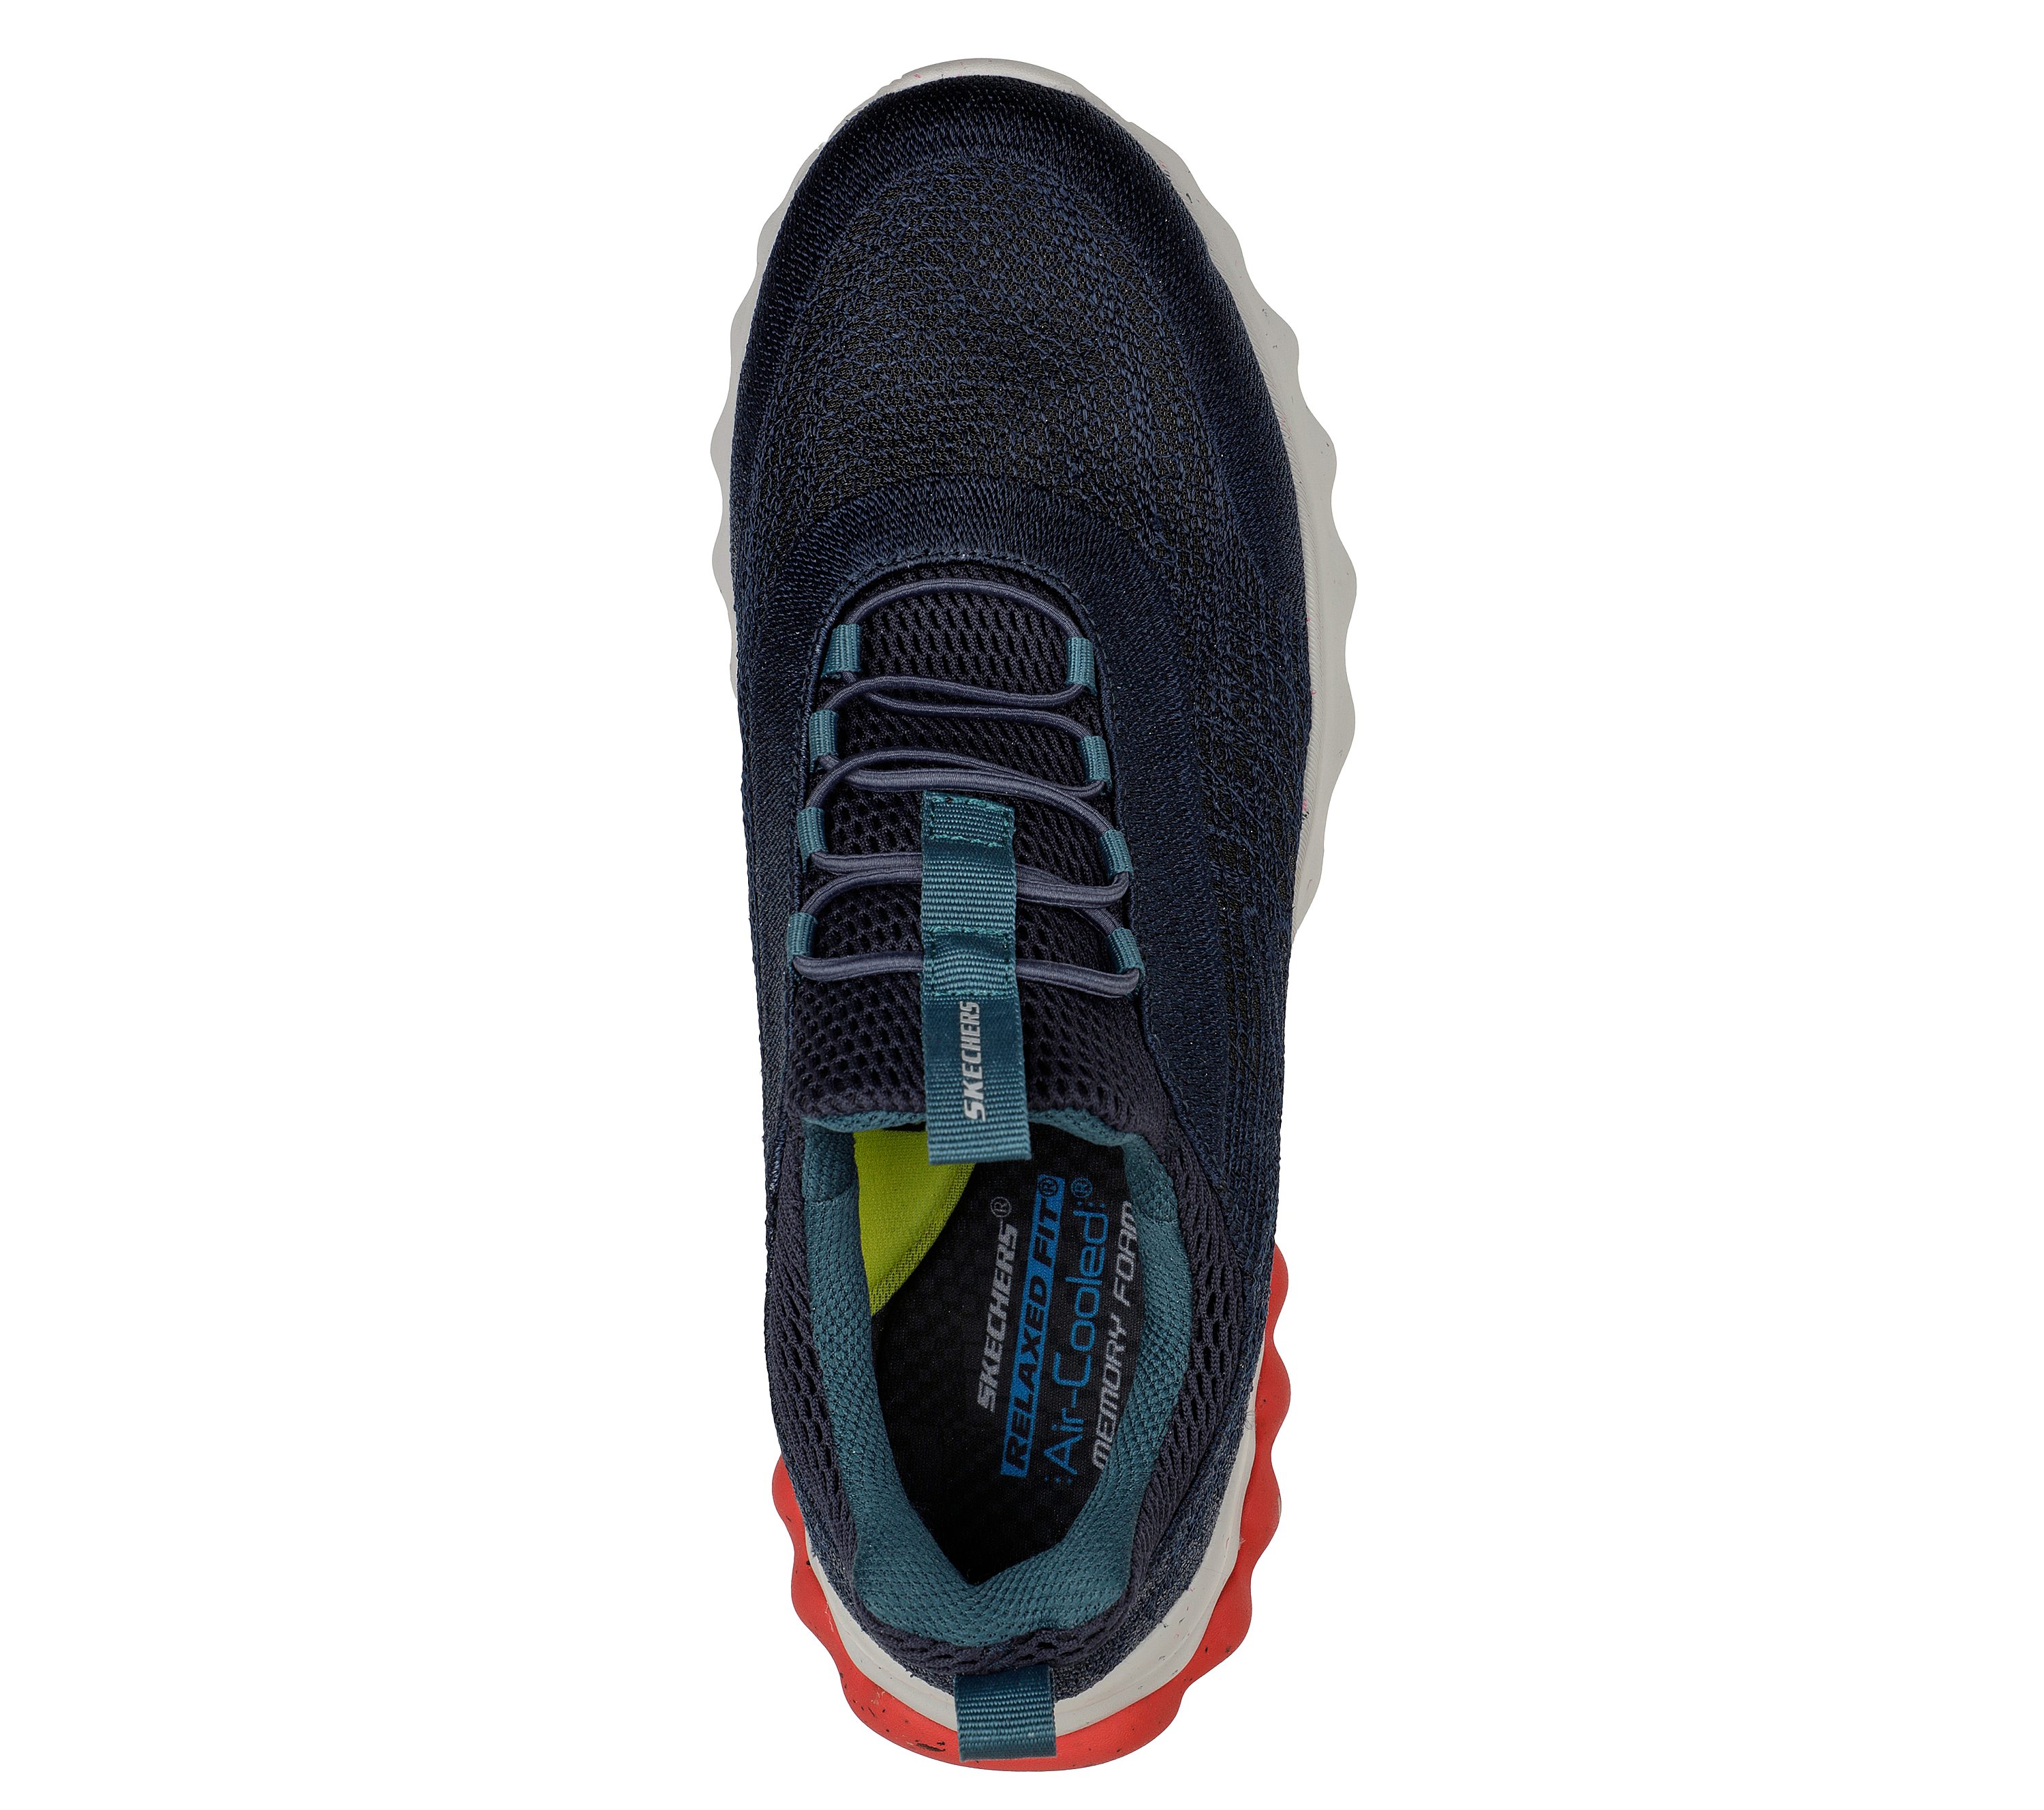 enlace arco Ewell Relaxed Fit: Voston - Reever | SKECHERS ES